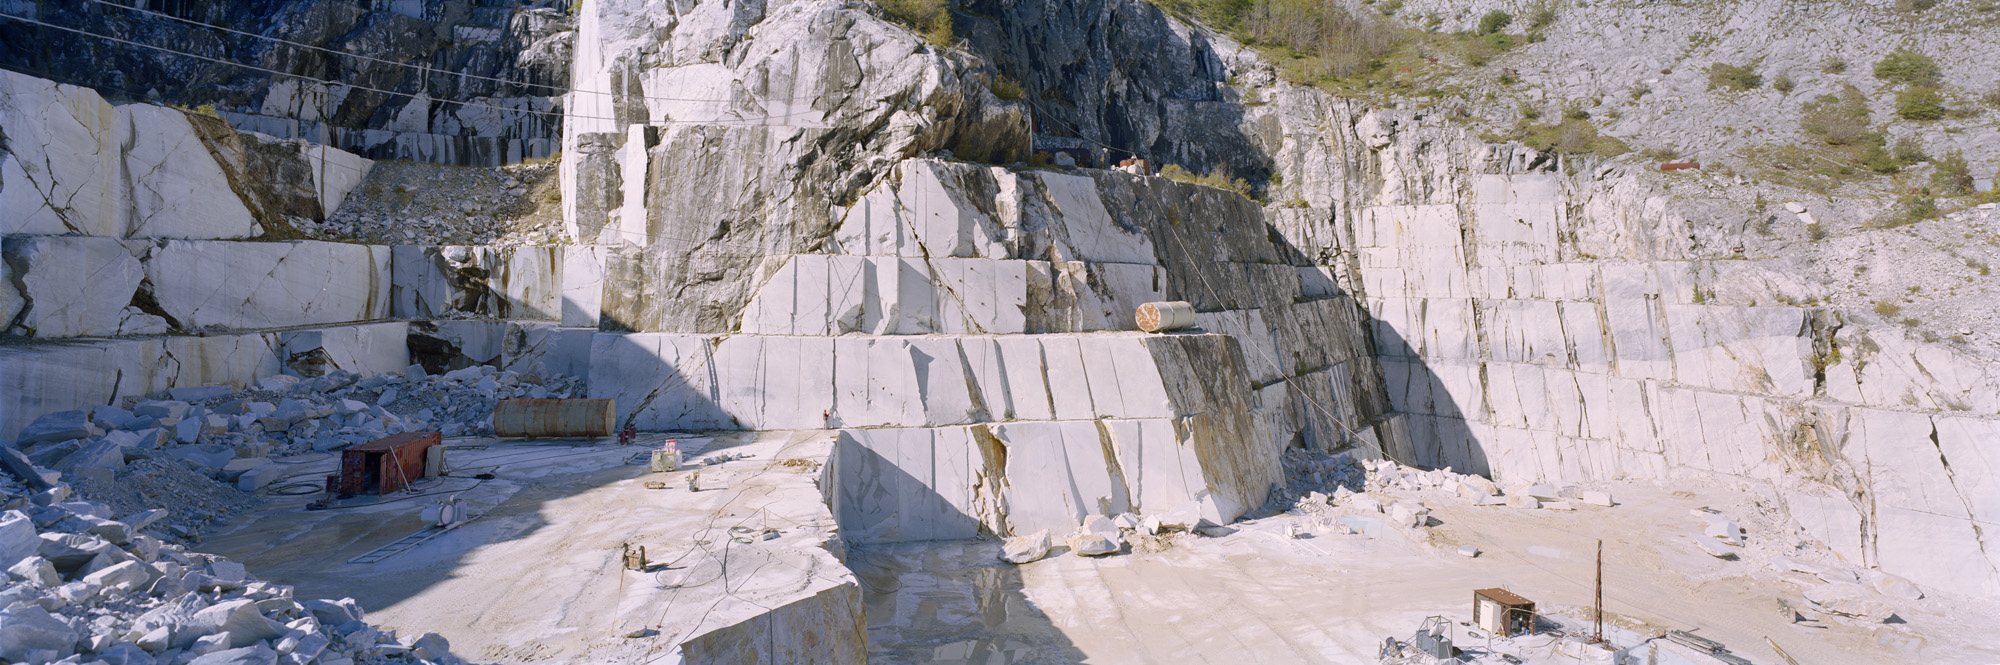 large format photography, large format photography, large format photography, photograph, photography, photography, 6x17, open pit, marble, stone, rock, white, marbled, Italy, Alpi Apuane,